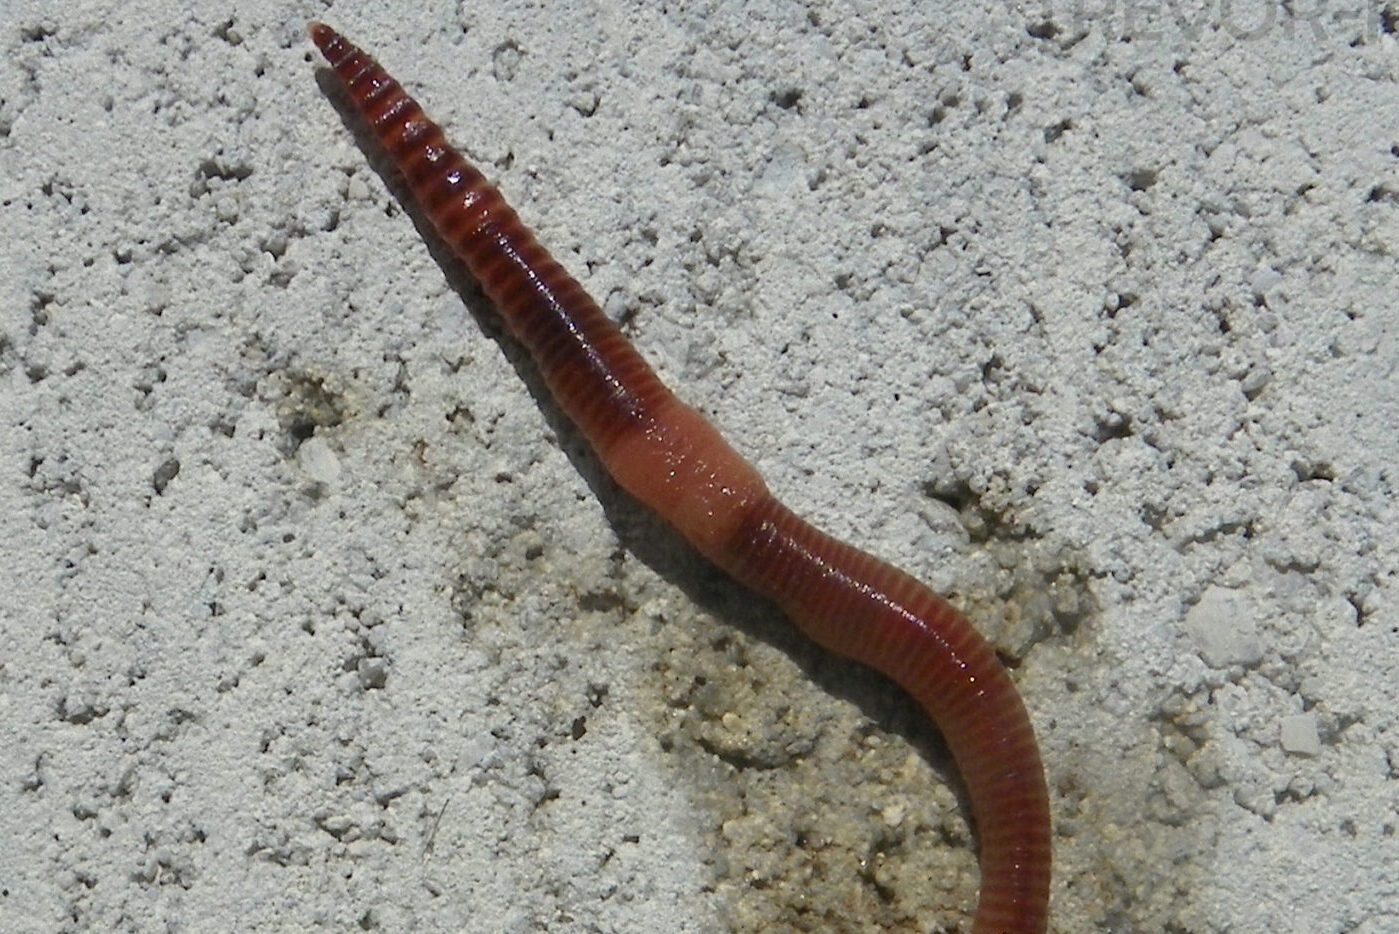 Small and Simple Things: Earthworms